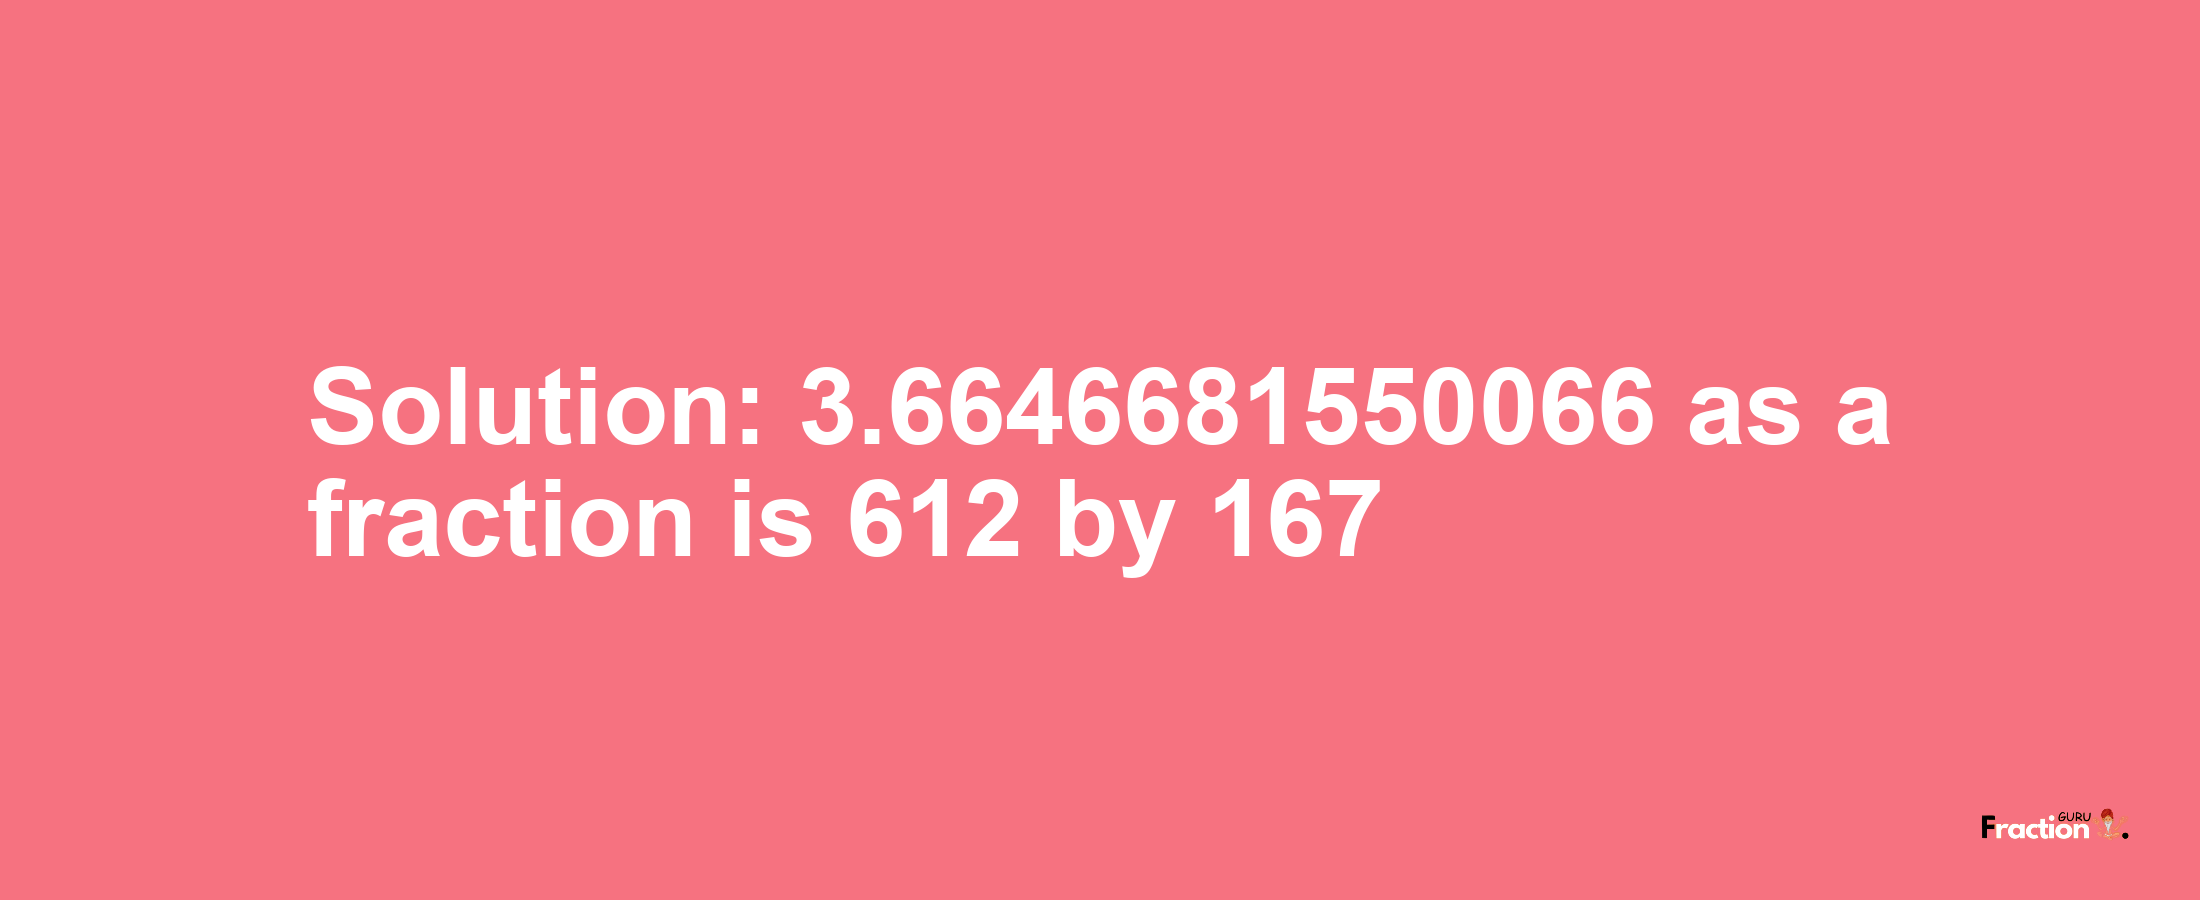 Solution:3.6646681550066 as a fraction is 612/167